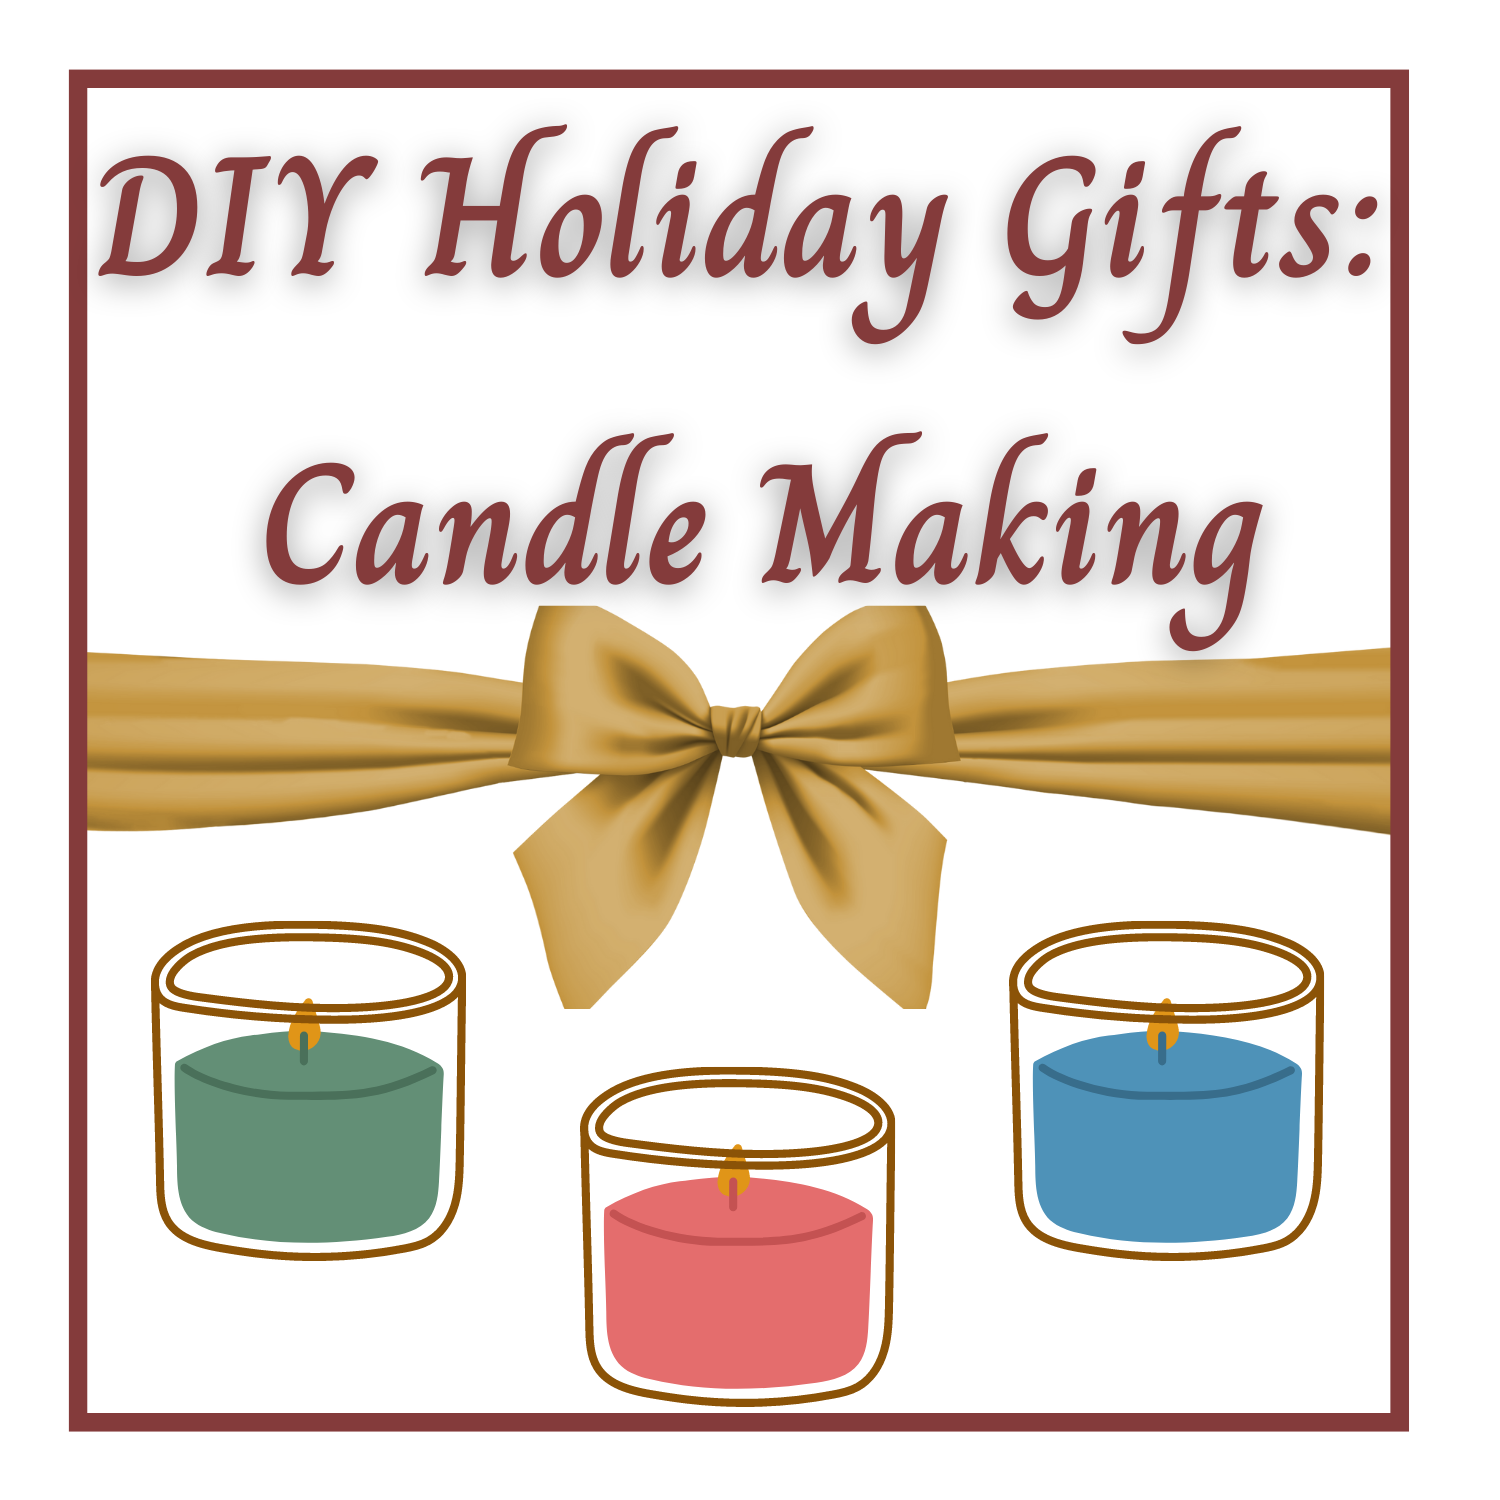 DIY Holiday Gifts: Candle Making